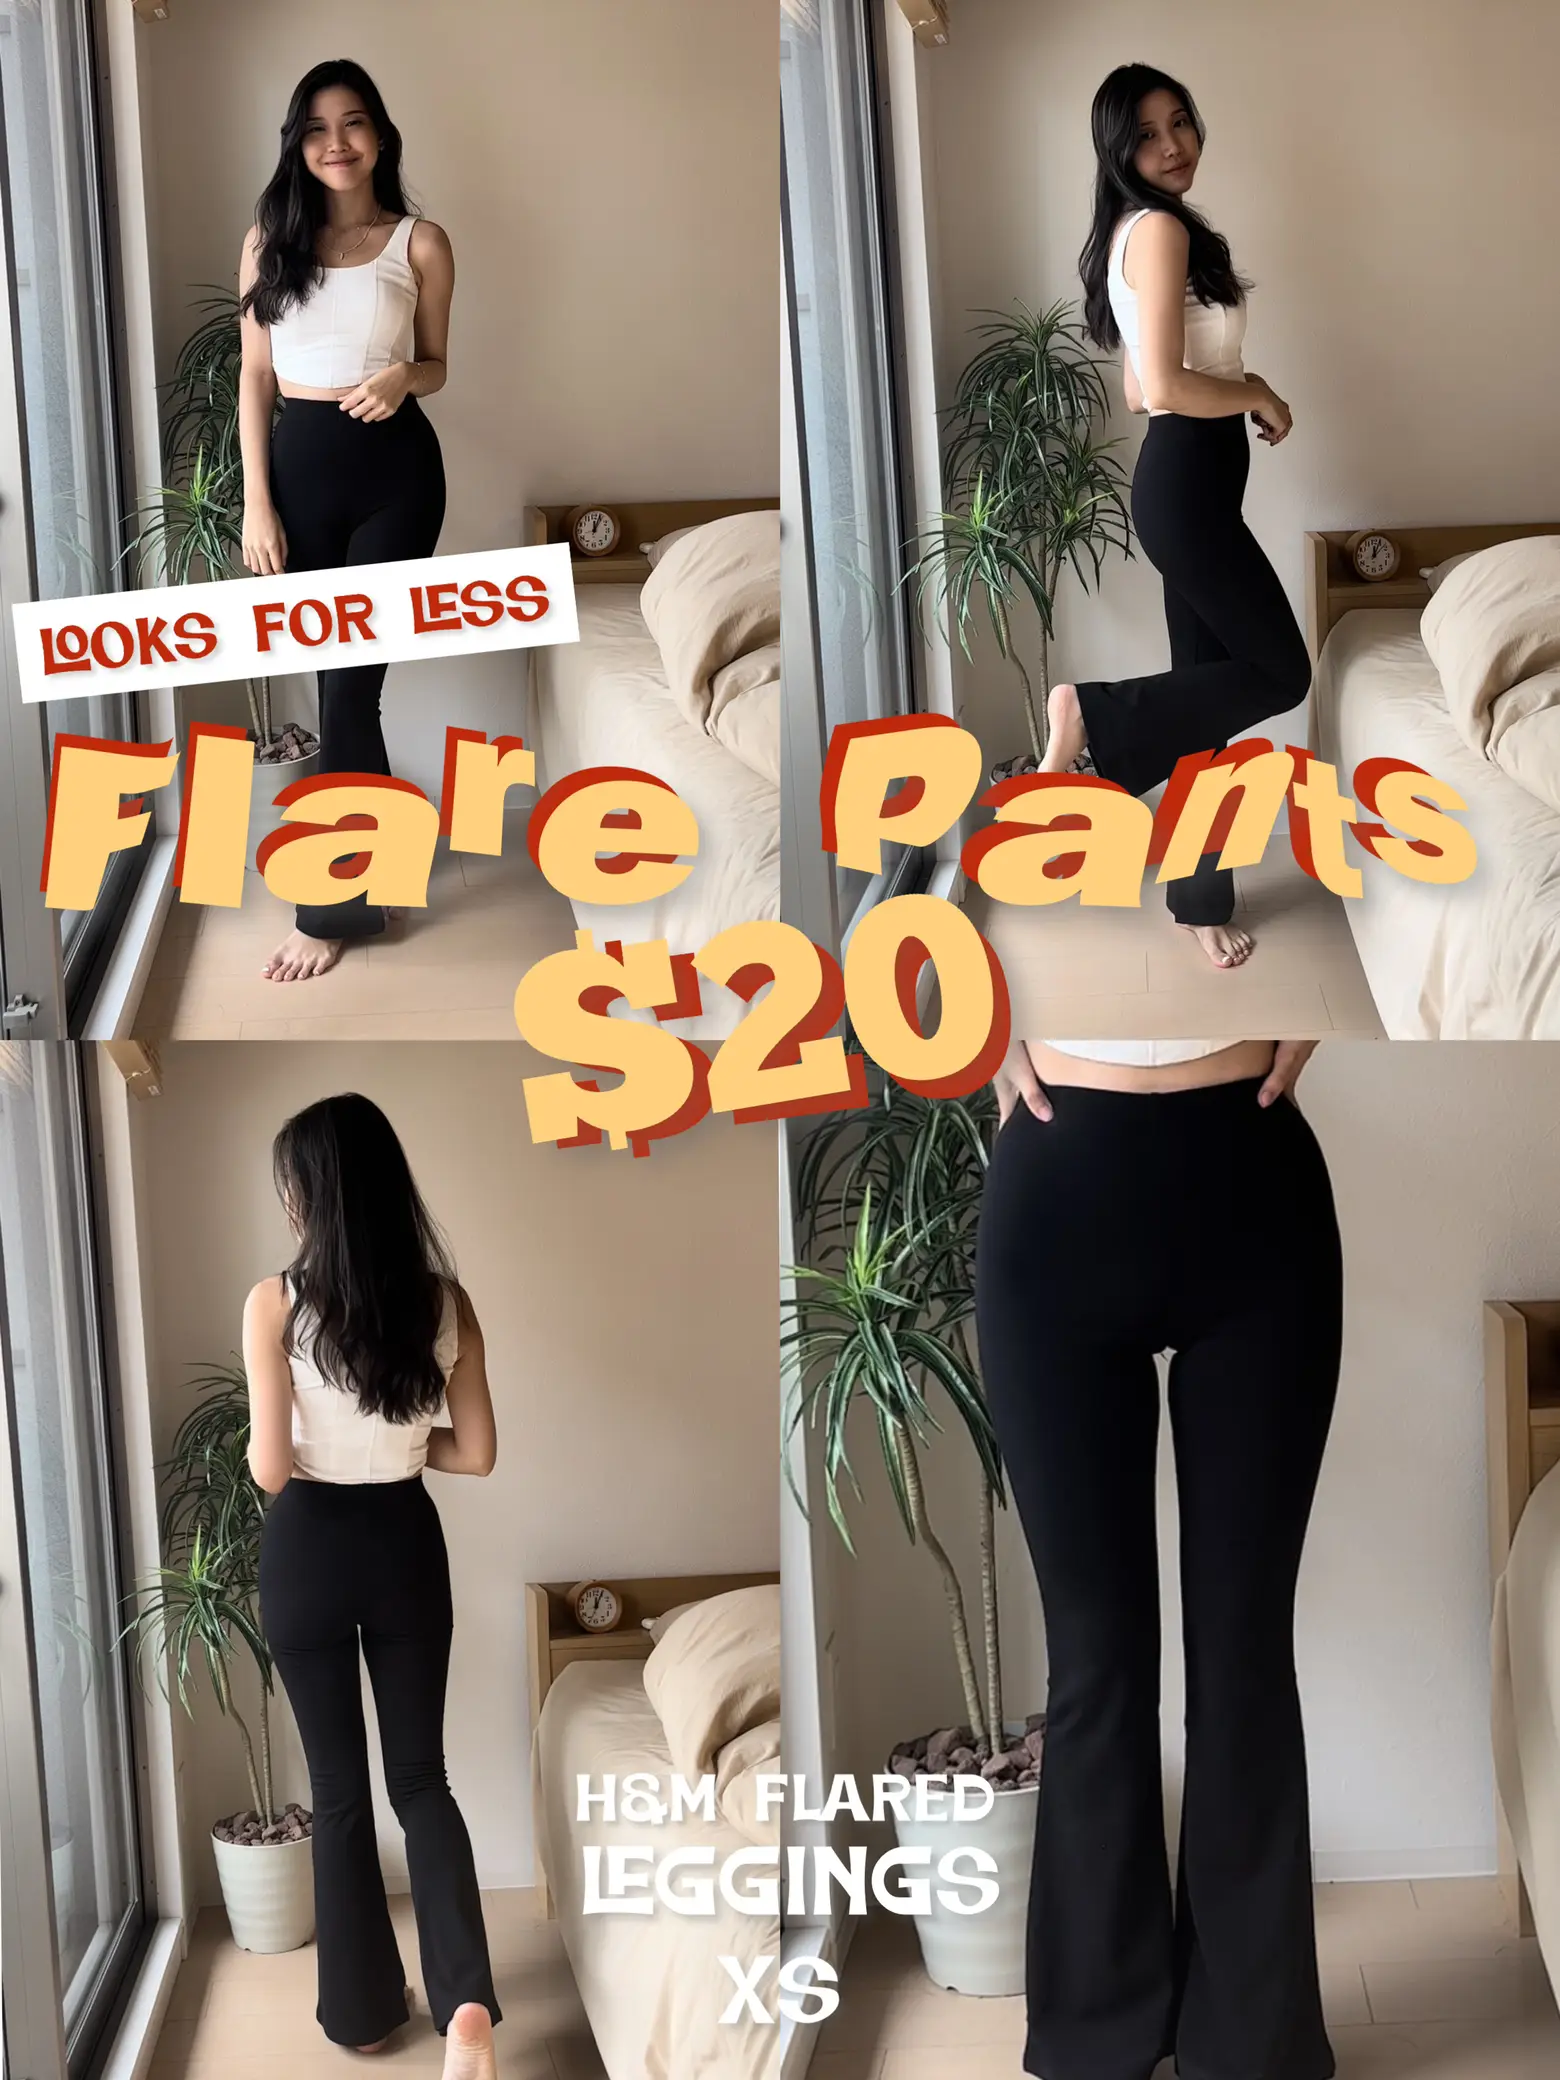 ✨Looks For Less: $20 H&M Flared Leggings👖, Gallery posted by Mandy Wong